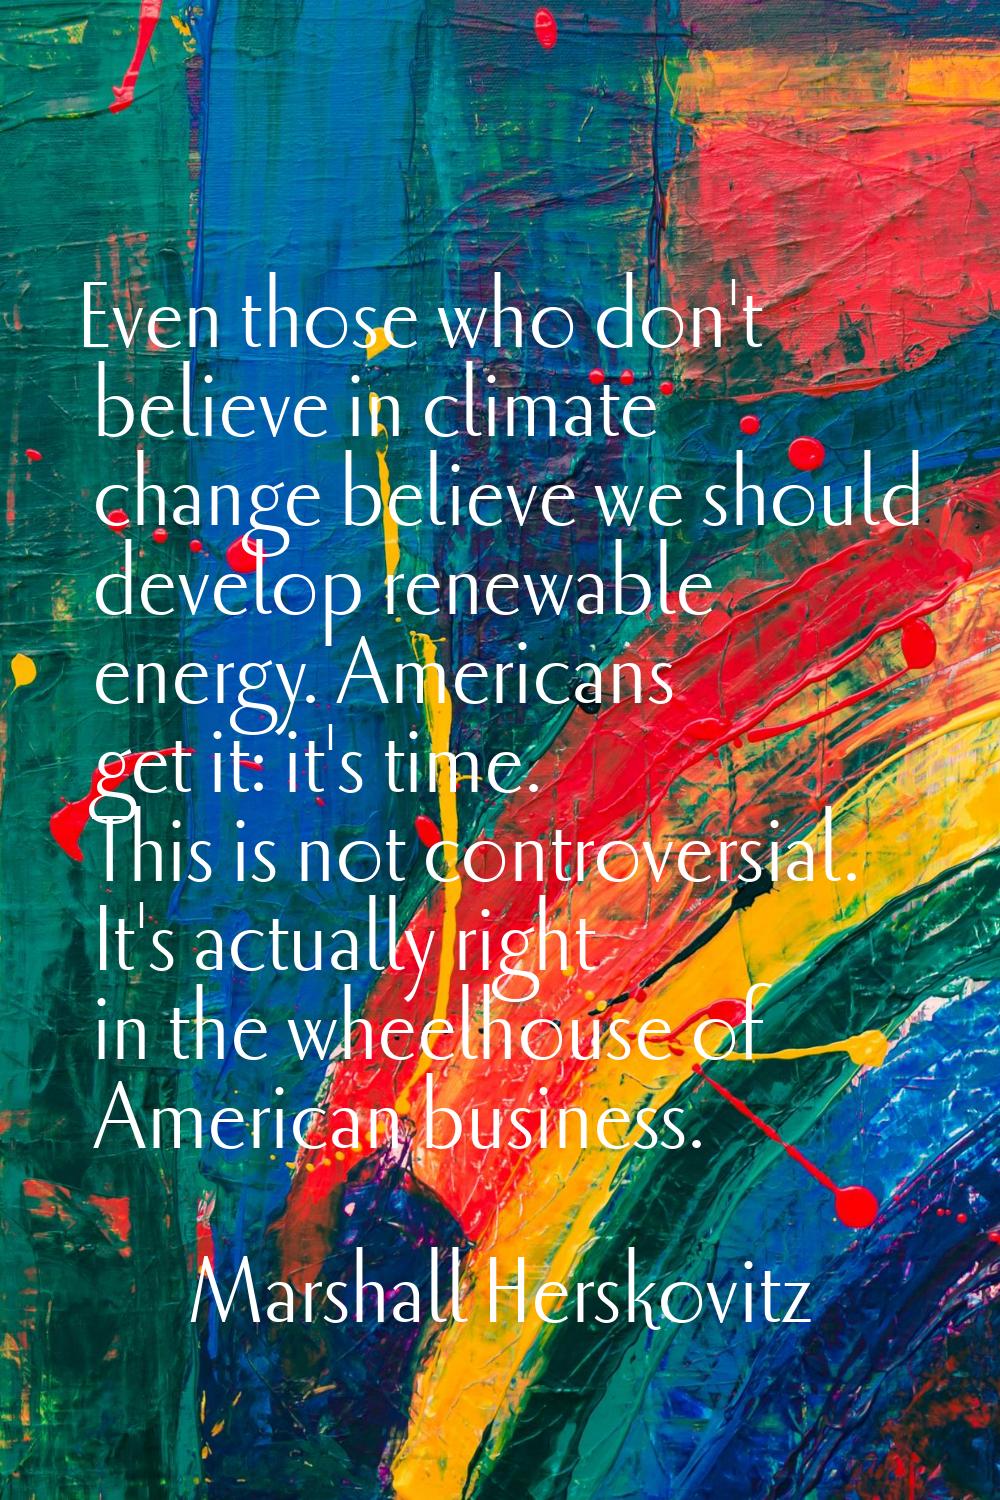 Even those who don't believe in climate change believe we should develop renewable energy. American